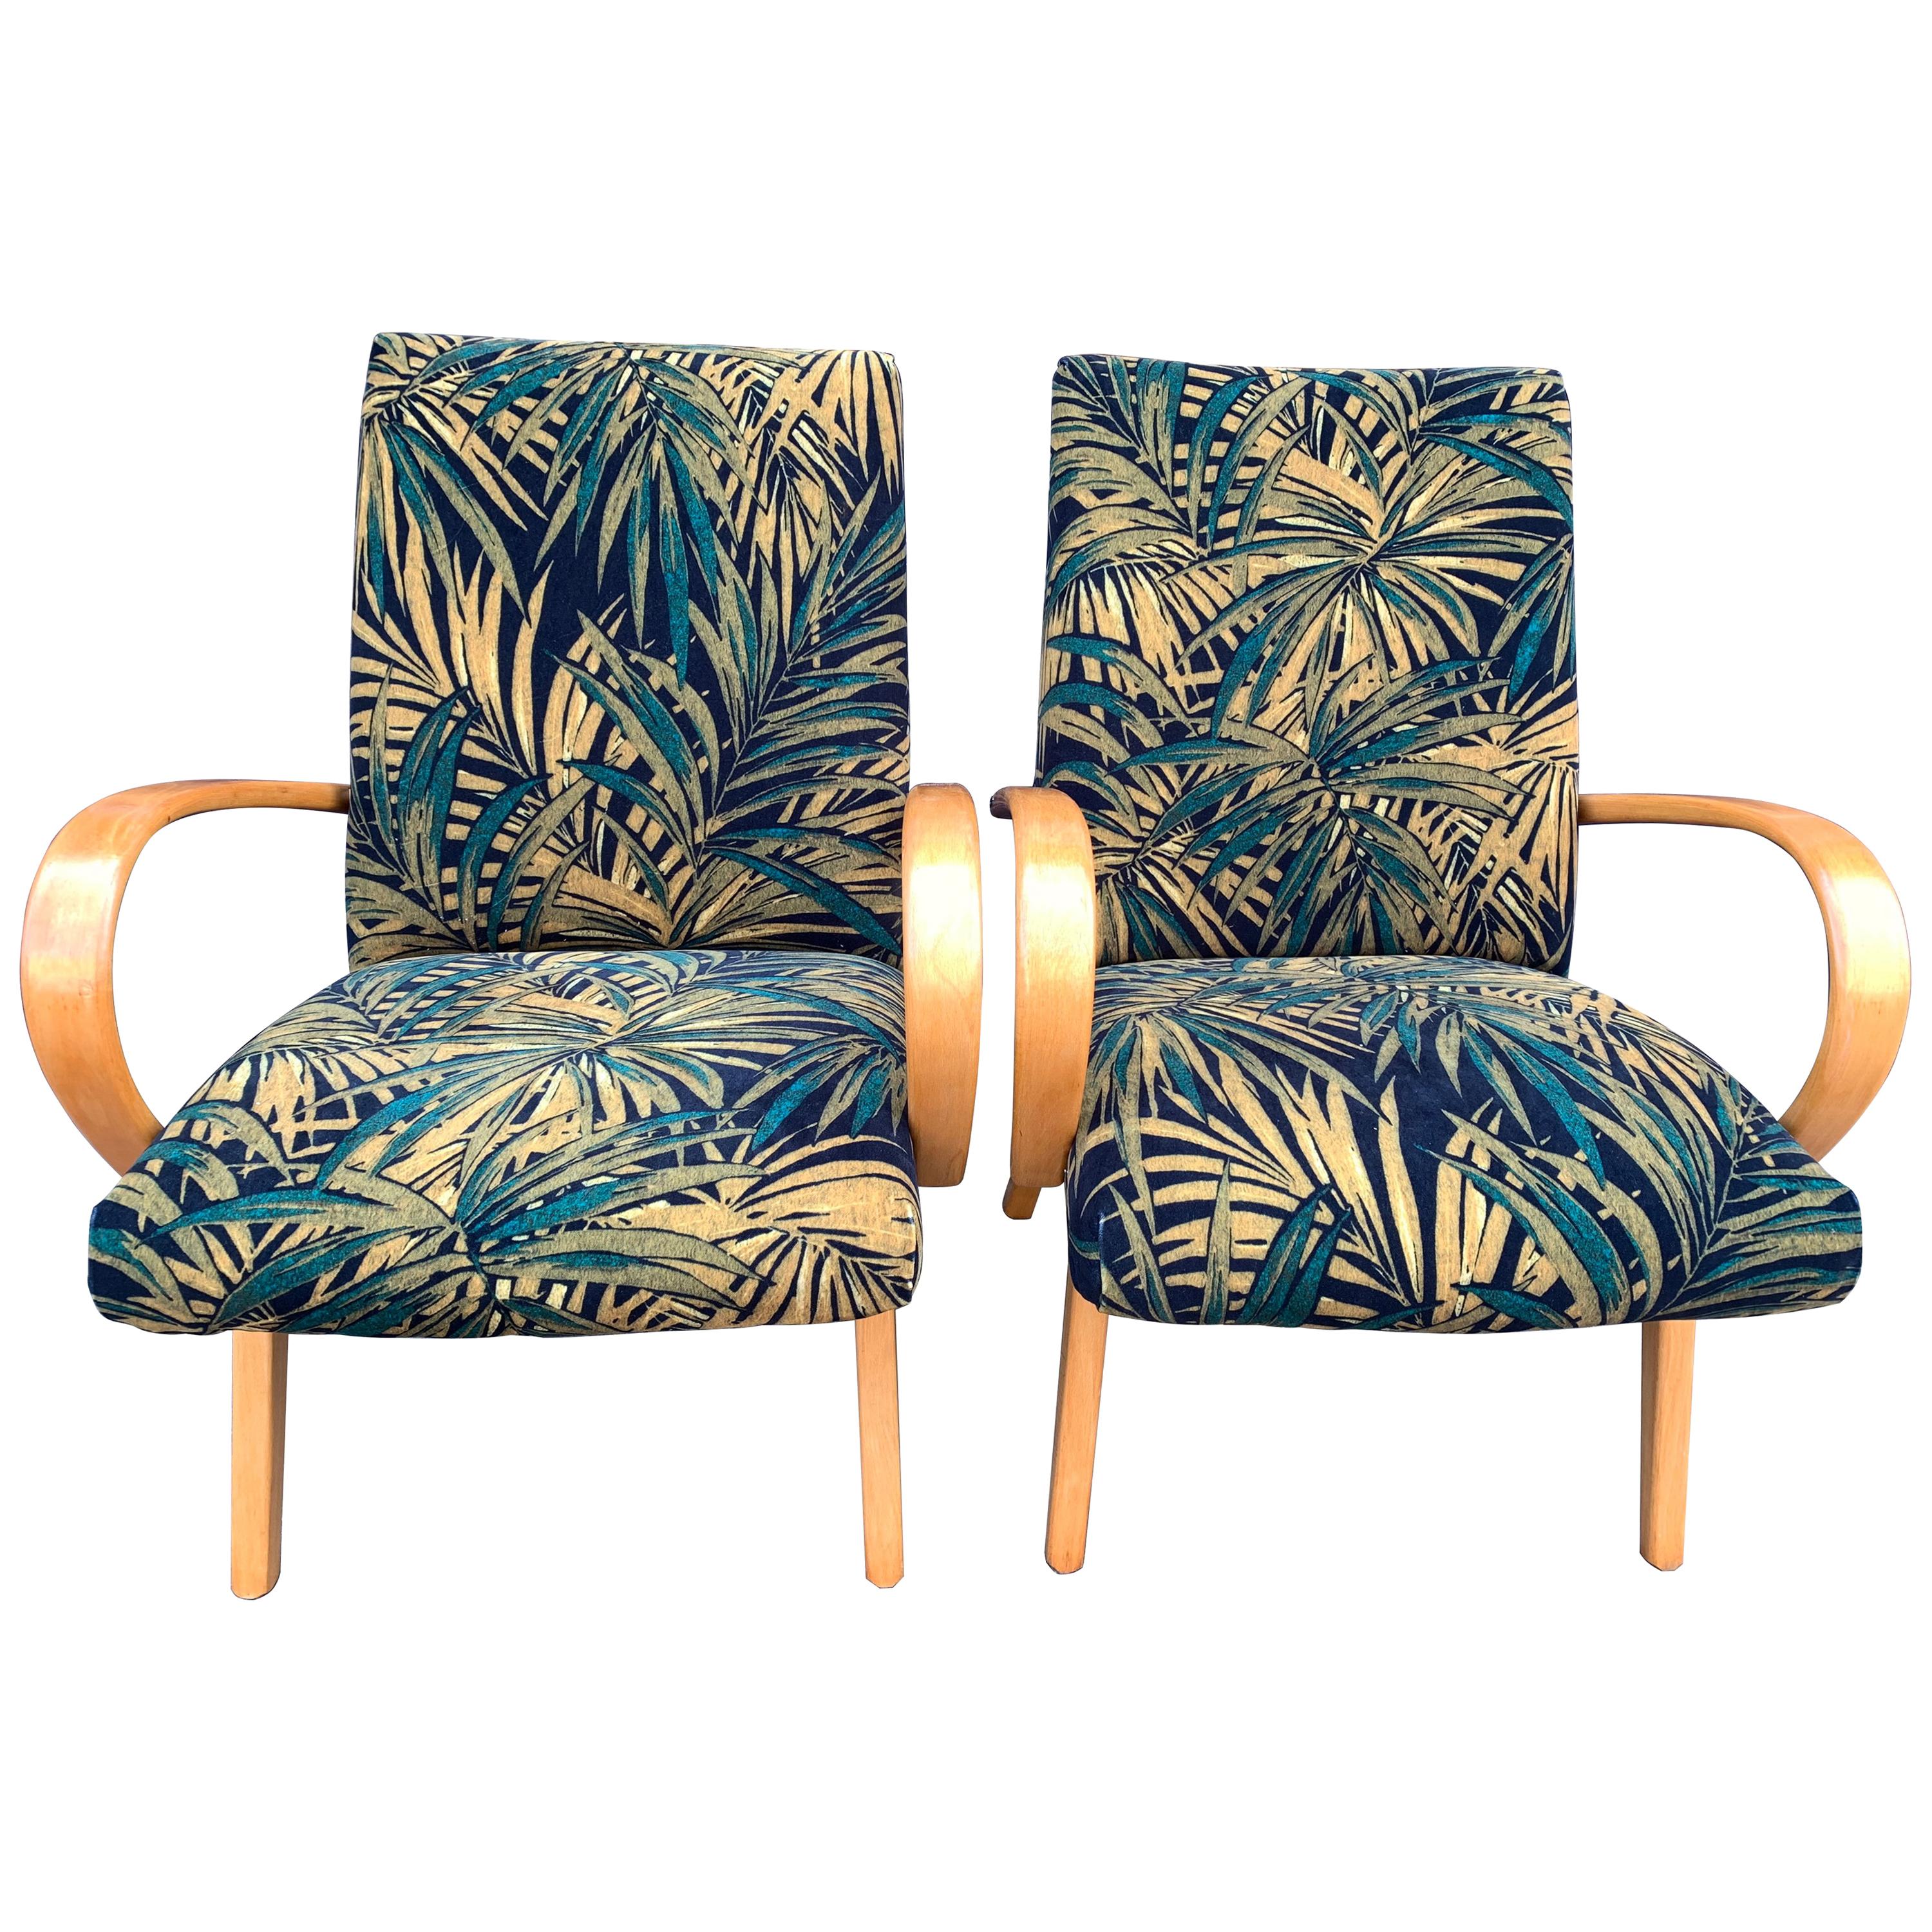 1960s Pair of Czech Republic Lounge Chairs Armchairs by Jaroslav Smidek for Ton